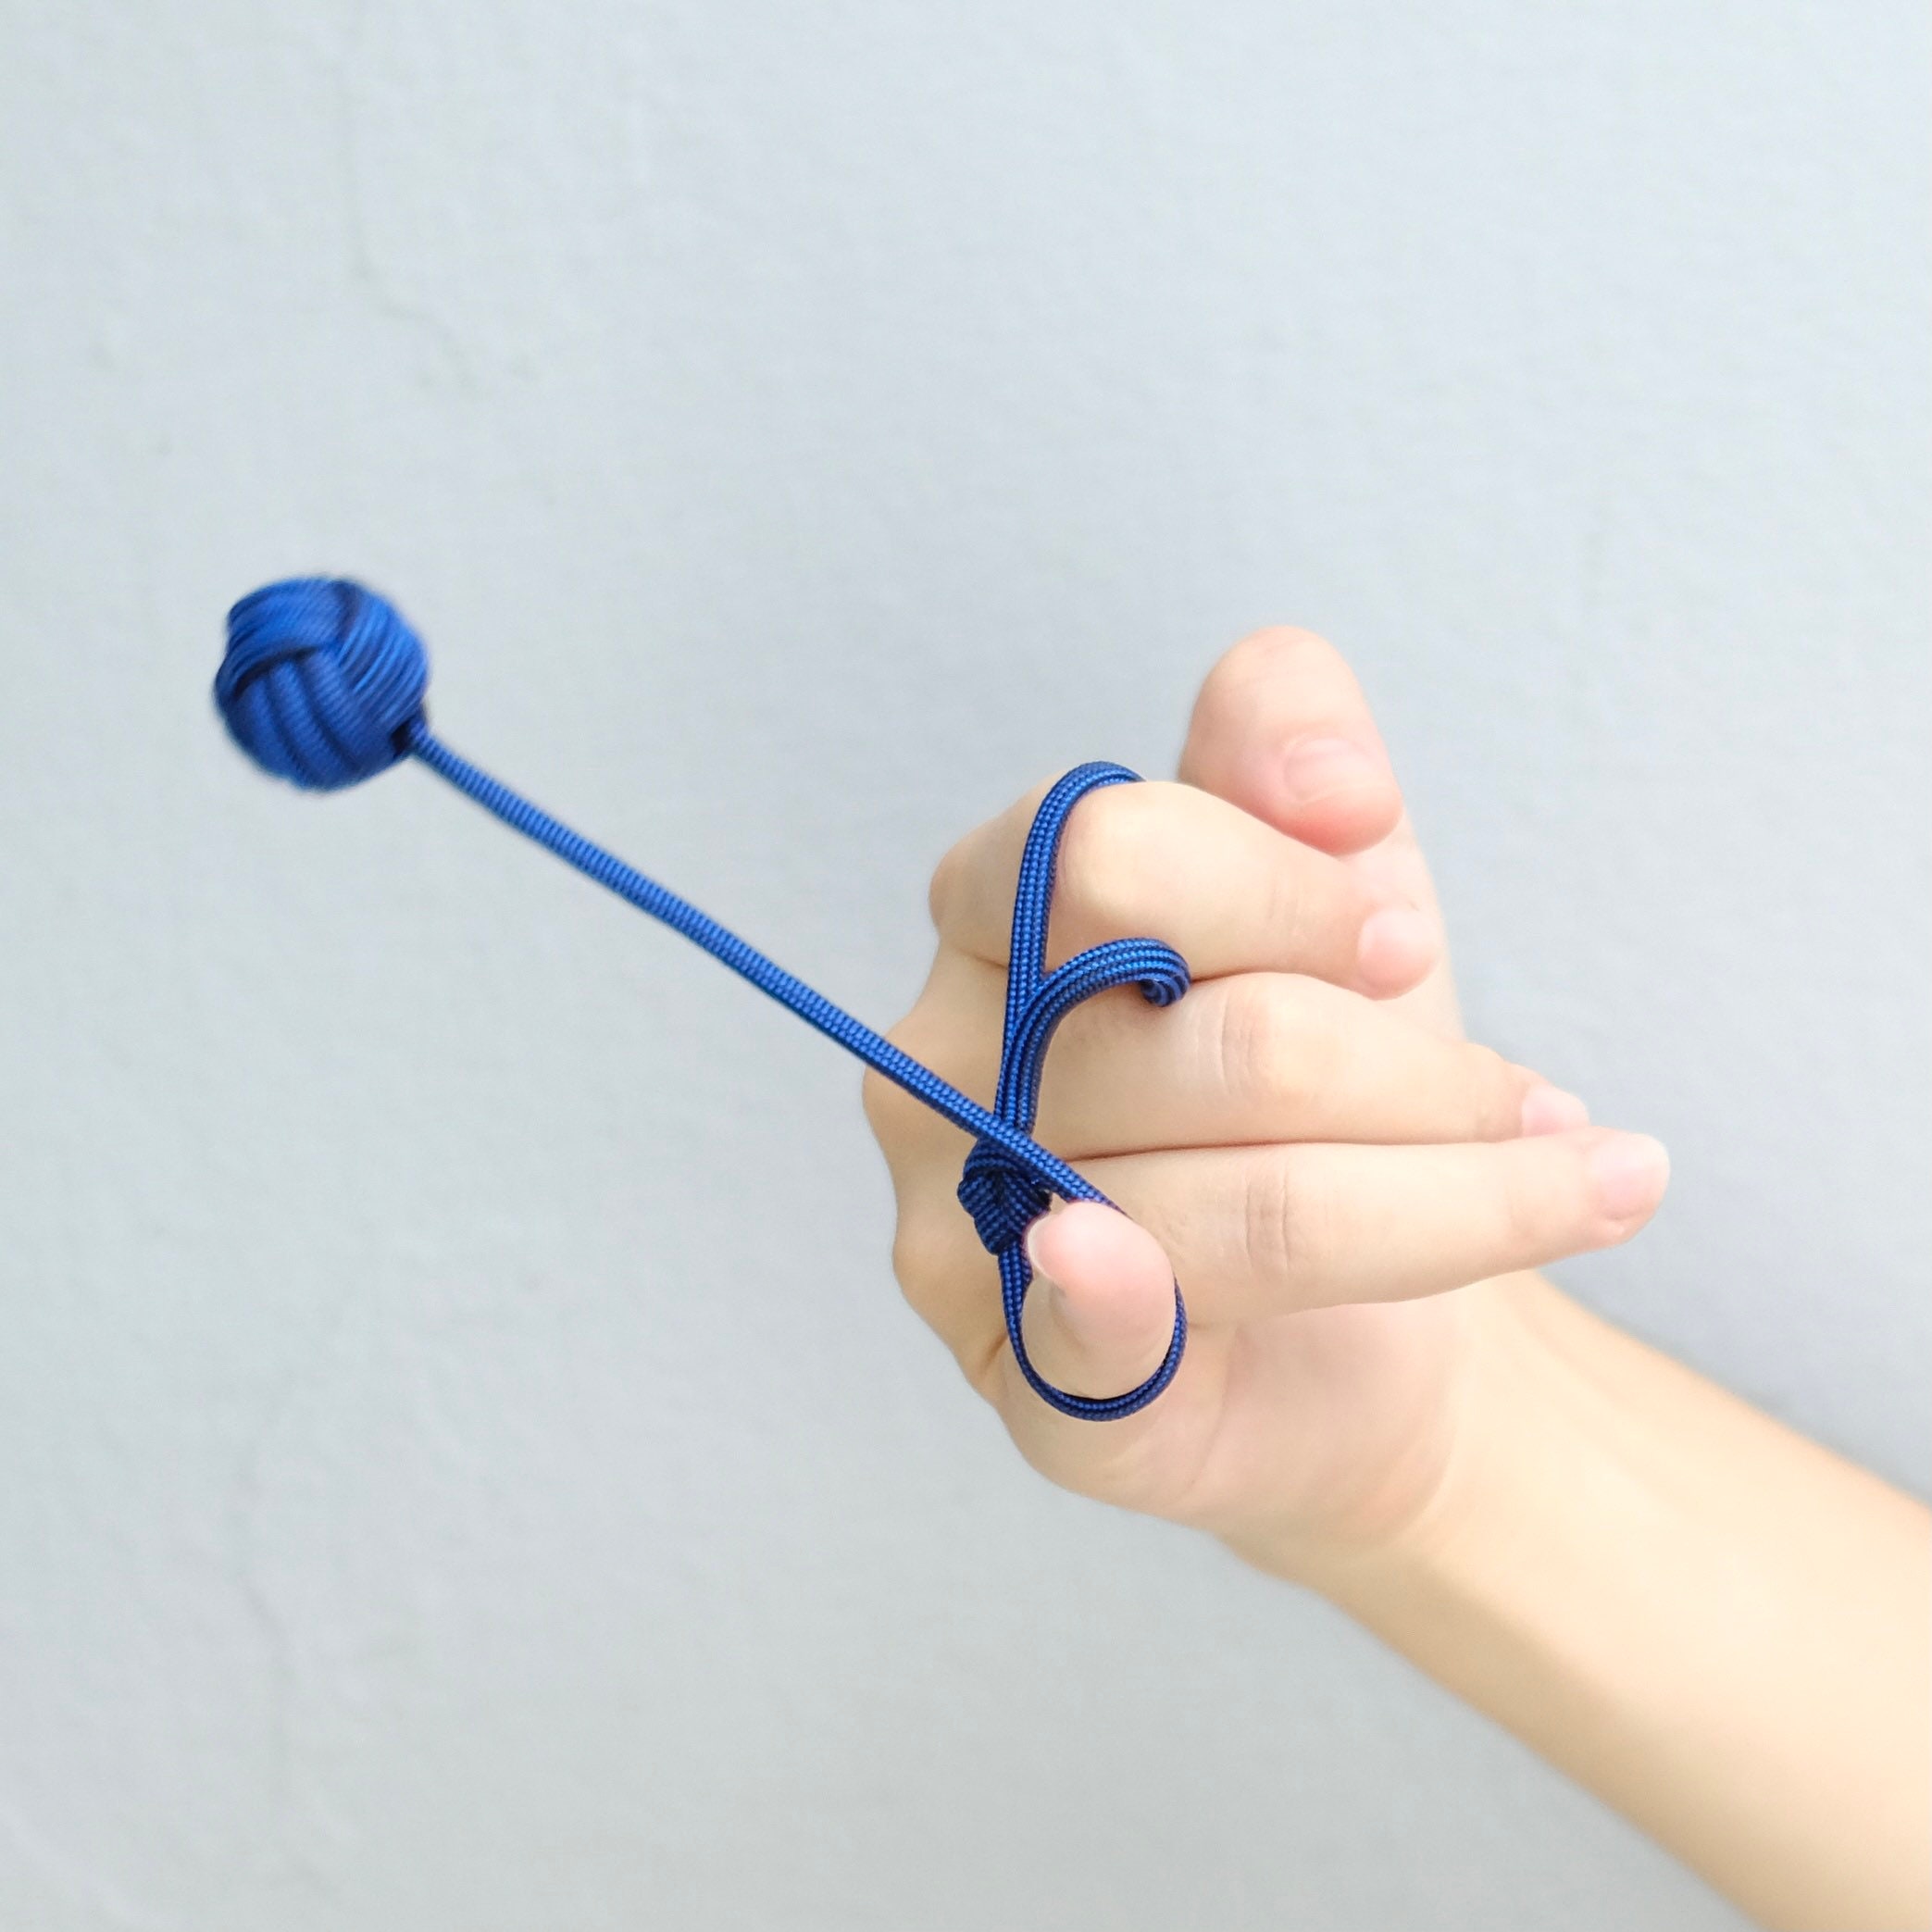 Finger Toy For Practicing Finger Dexterity - Aluminum Alloy Double Beads  And A String Finger Ball Alloy Toy, Can Be Used To Demonstrate Various Cool  A